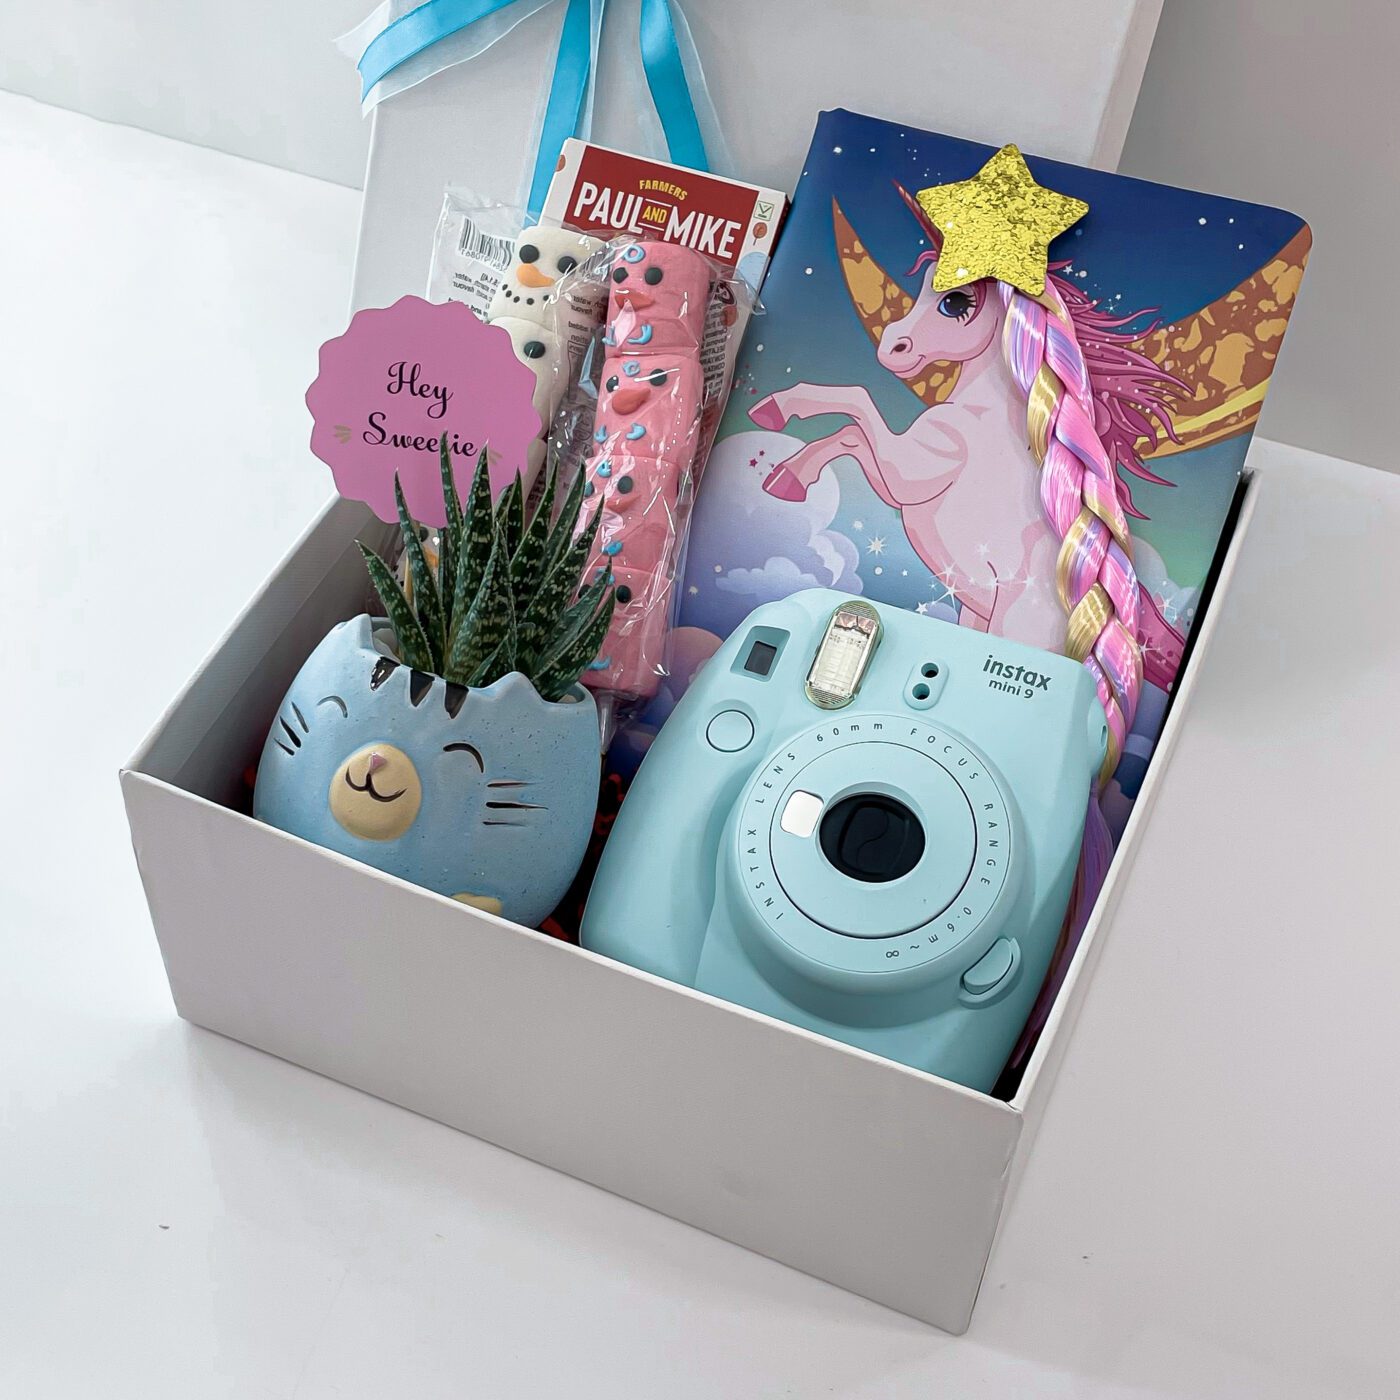 Buy Baby Shower Gifts for Boys, New Born Baby Gifts for Boys, Unique Baby  Gifts Basket Essential Stuff, Gender Reveal Gifts, Onesie, Blanket, Rattle,  Lovey, Socks, , Decision Coin, Milestone Online at